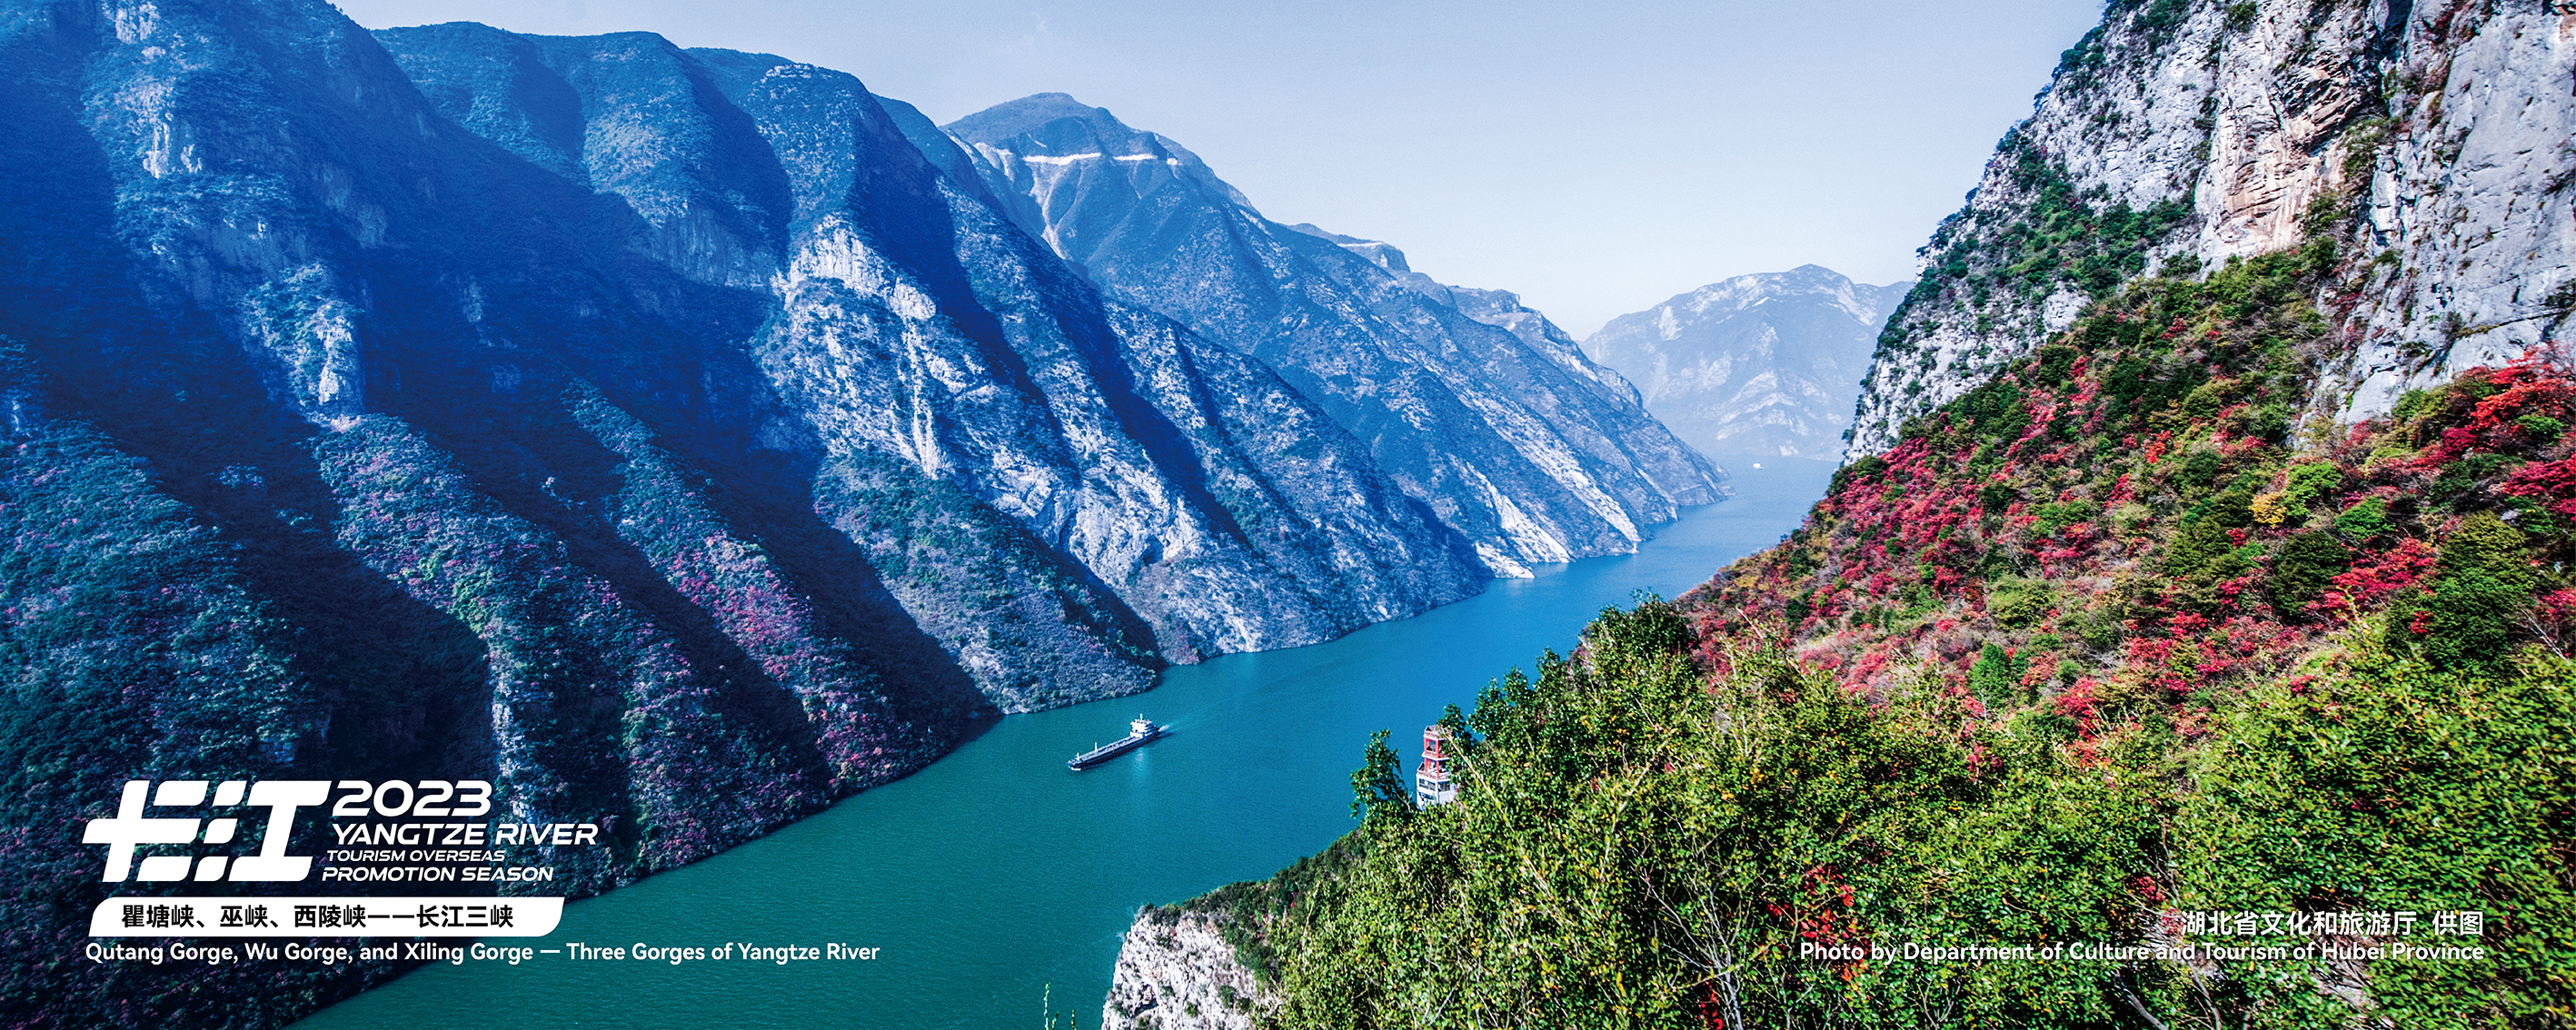 Qutang Gorge, Wu Gorge, and Xiling Gorge — Three Gorges of the Yangtze River /Photo provided to CGTN